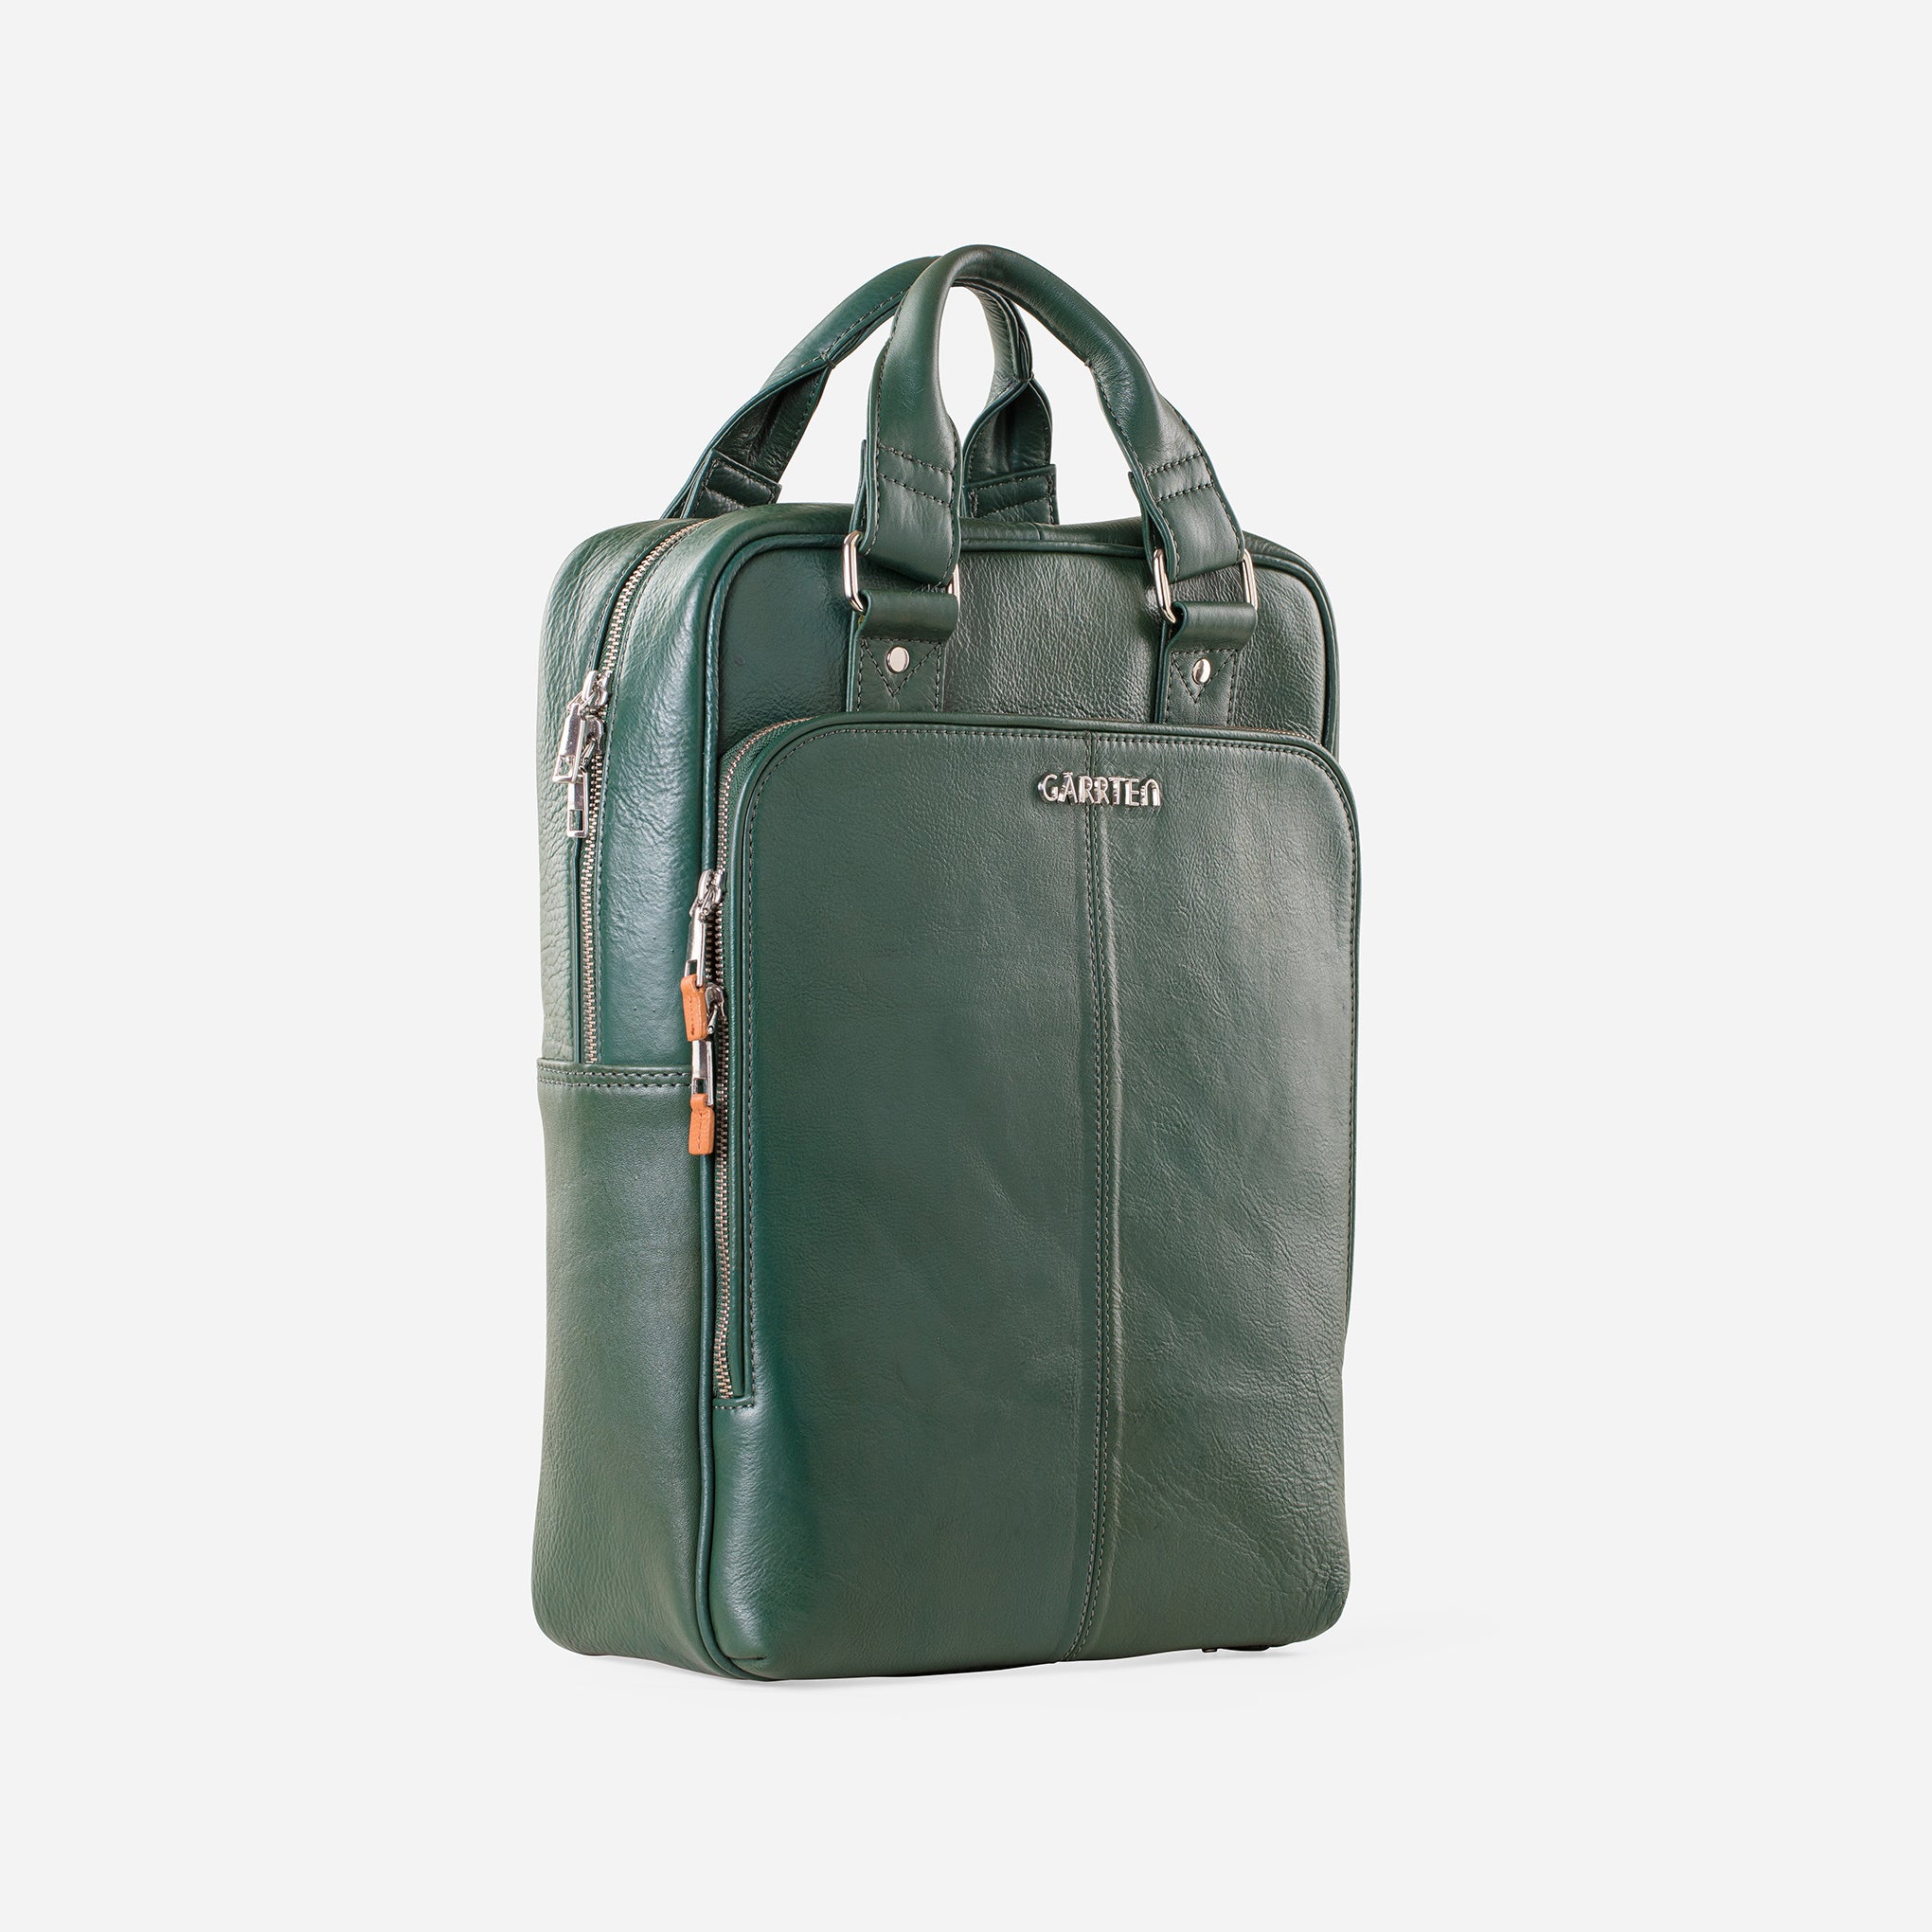 Adventurer Duo - Leather Backpack set in Racing Green & Midnight